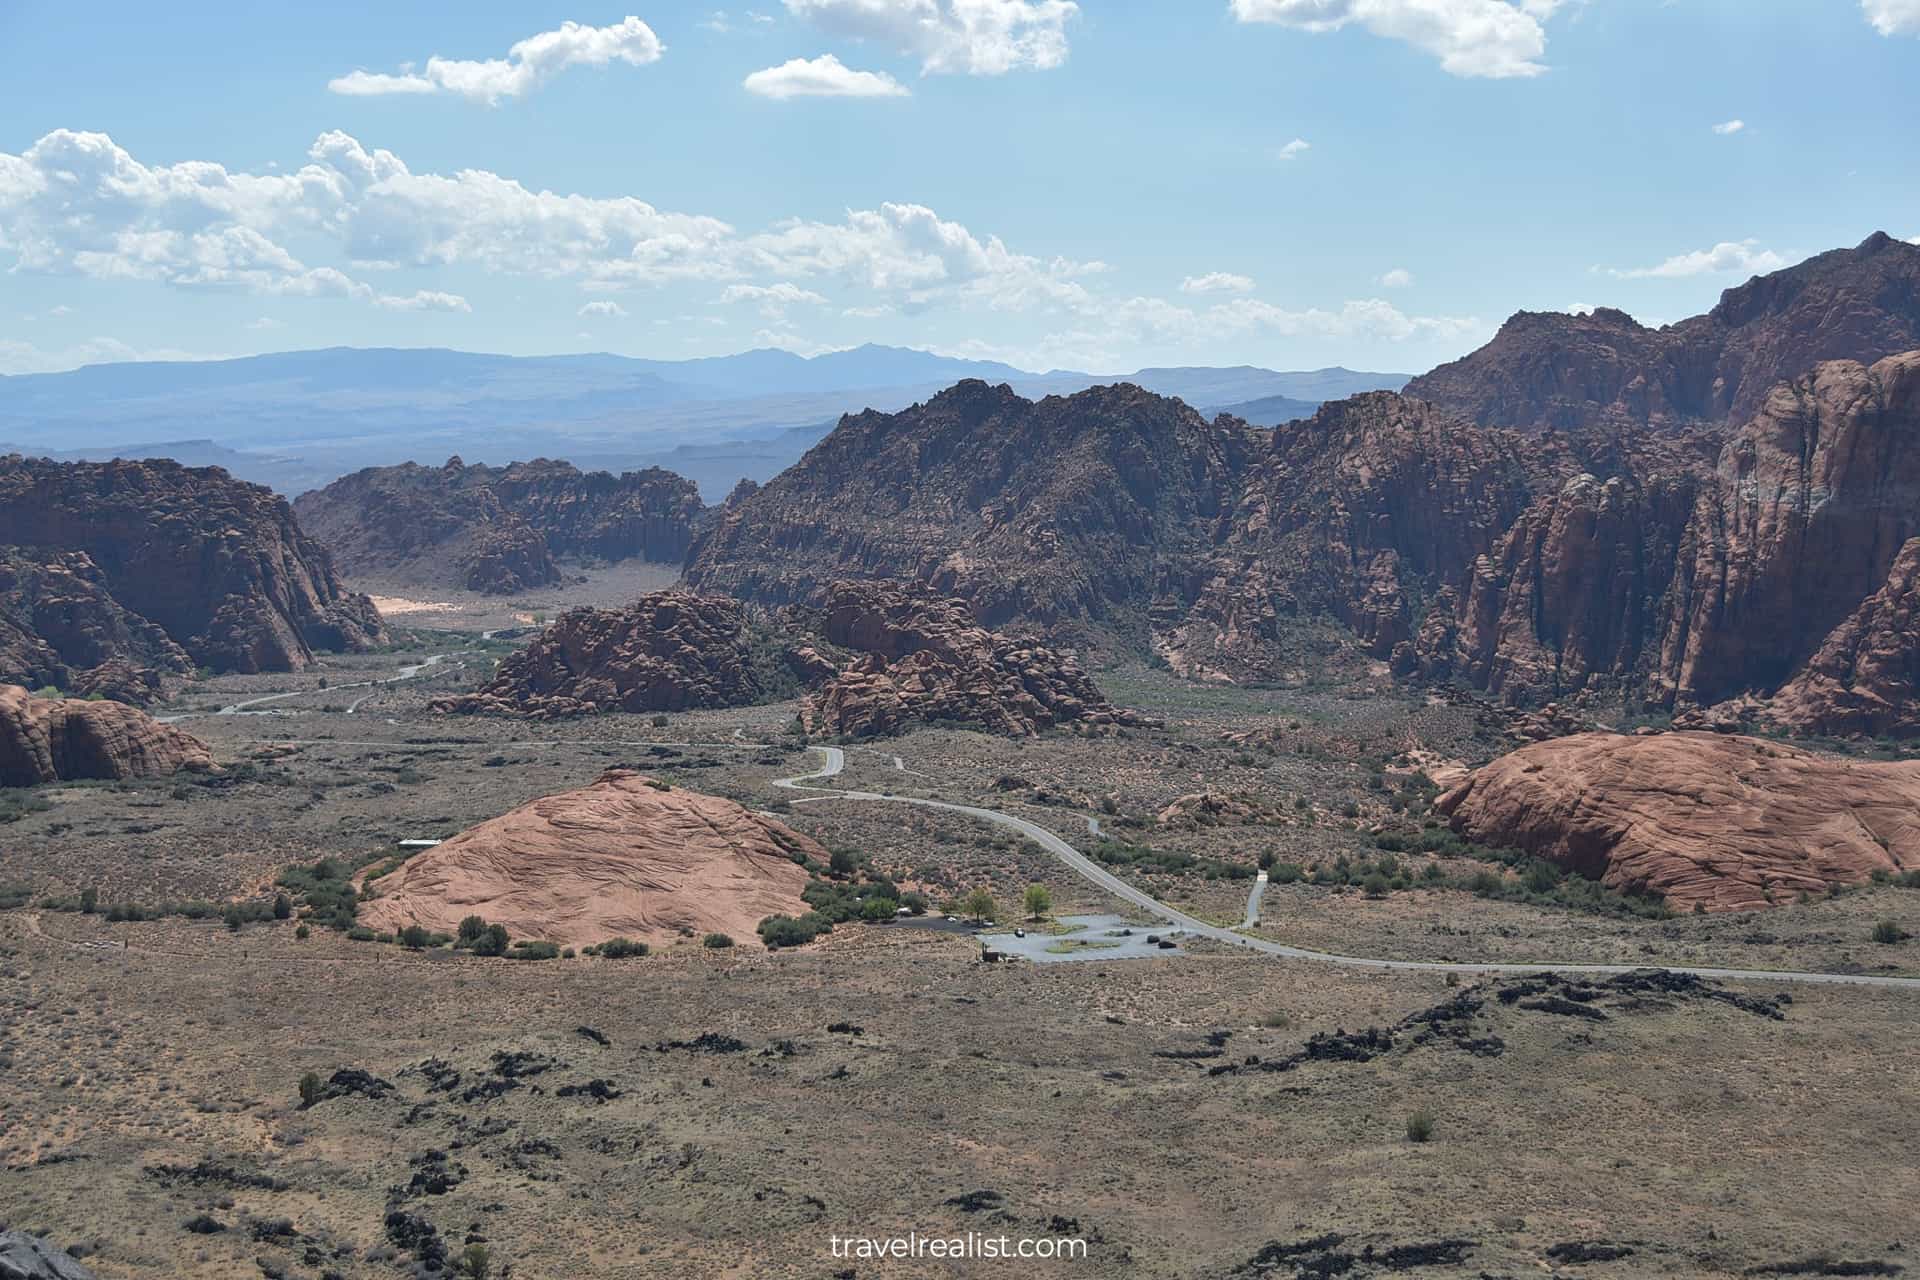 Views from Snow Canyon Scenic Overlook in Snow Canyon State Park, Utah, US